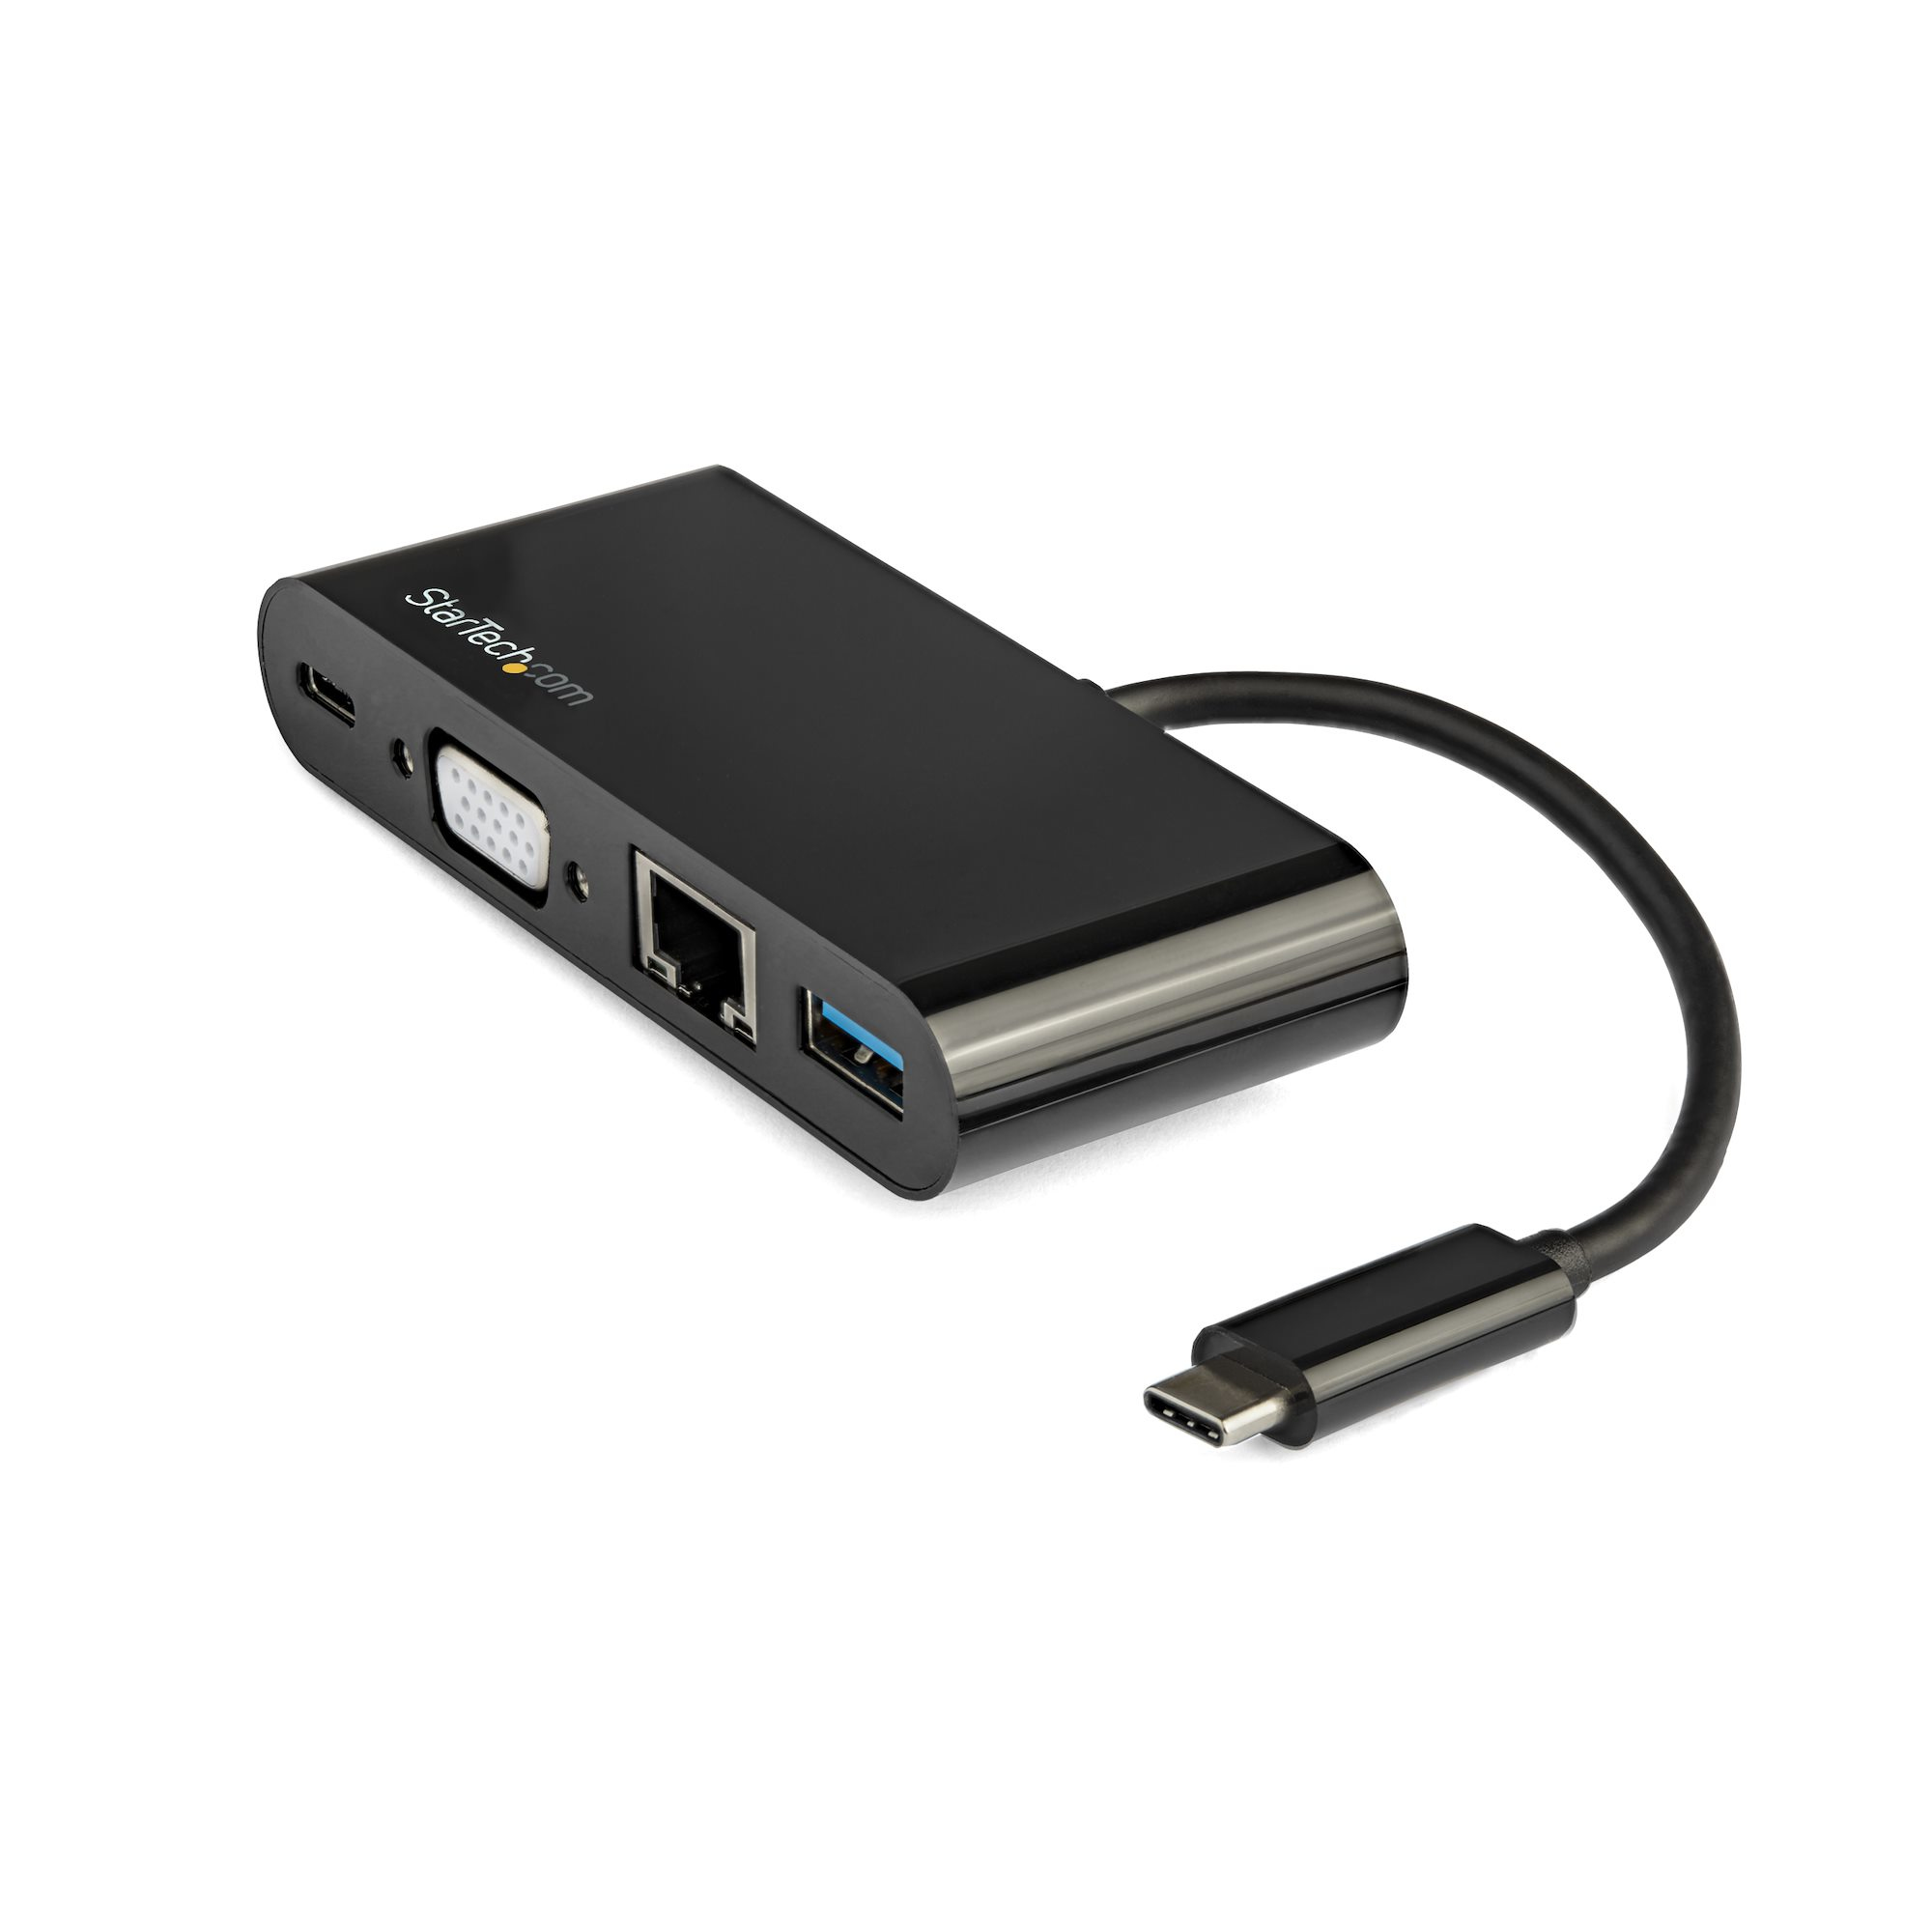 StarTech.com USB-C VGA Multiport Adapter - Power Delivery (60W)